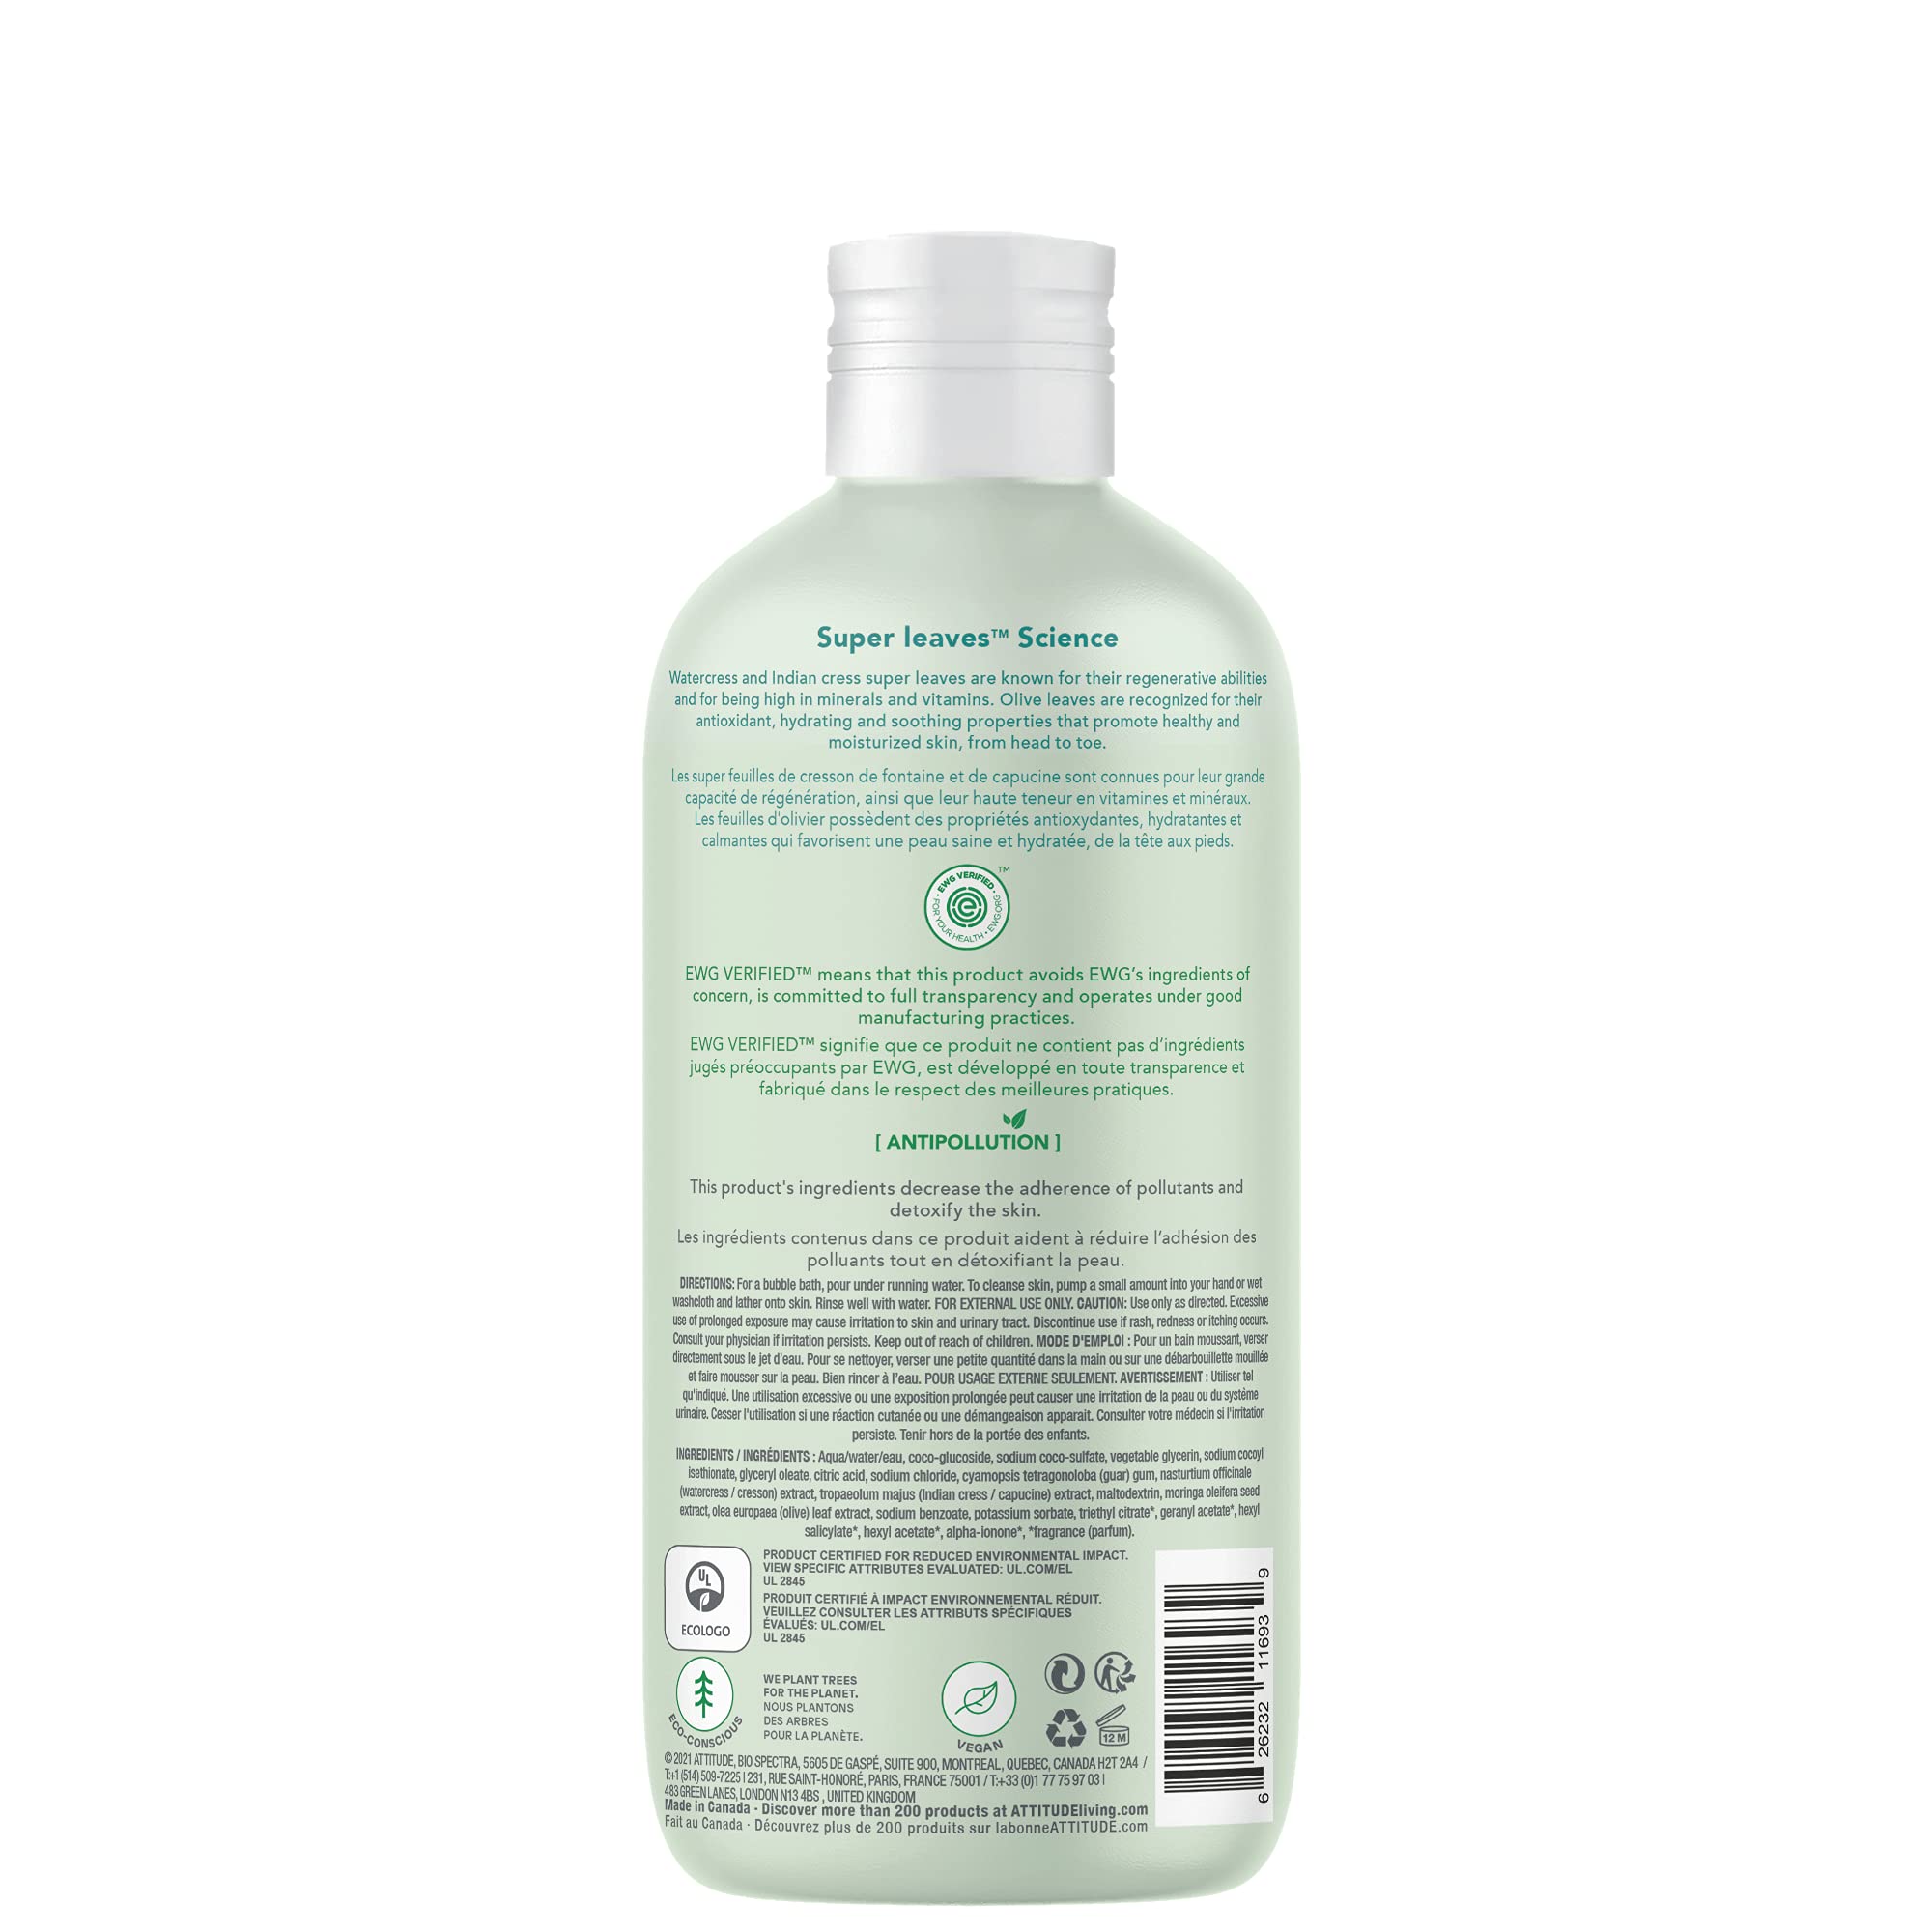 ATTITUDE Bubble Bath, EWG Verified, Plant and Mineral-Based Ingredients, Dermatologically Tested, Vegan and Cruelty-Free Body Care Products, Olive Leaves, 16 Fl Oz (Pack of 6)